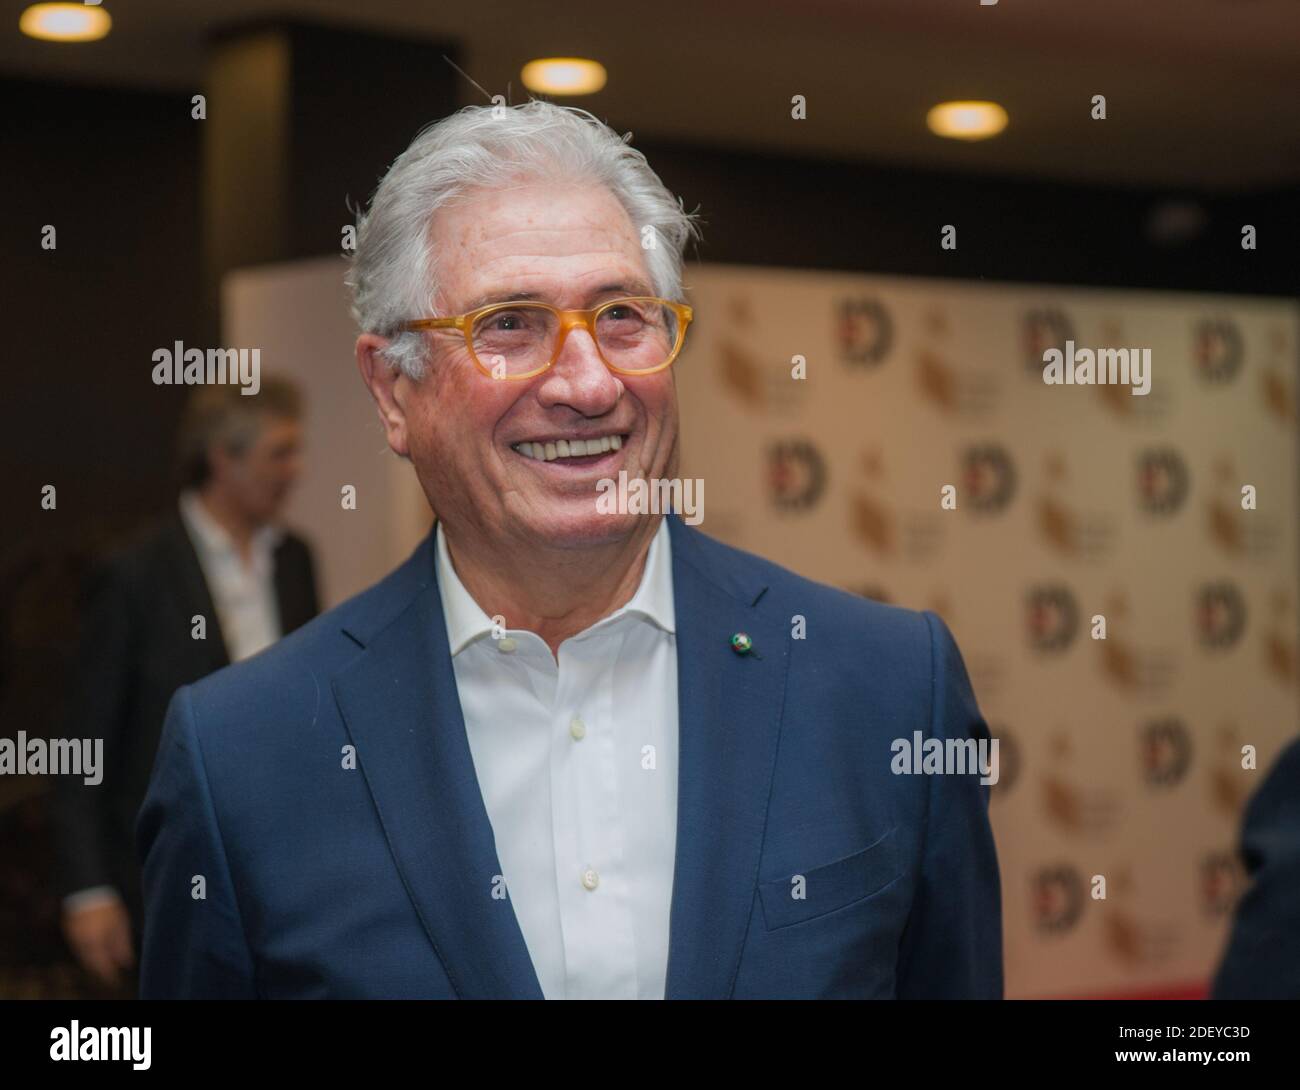 02/15/2017 Turin (Italy) The famous car designer Giorgetto Giugiaro on the occasion of the award ceremony at the Turin Automobile Museum Stock Photo